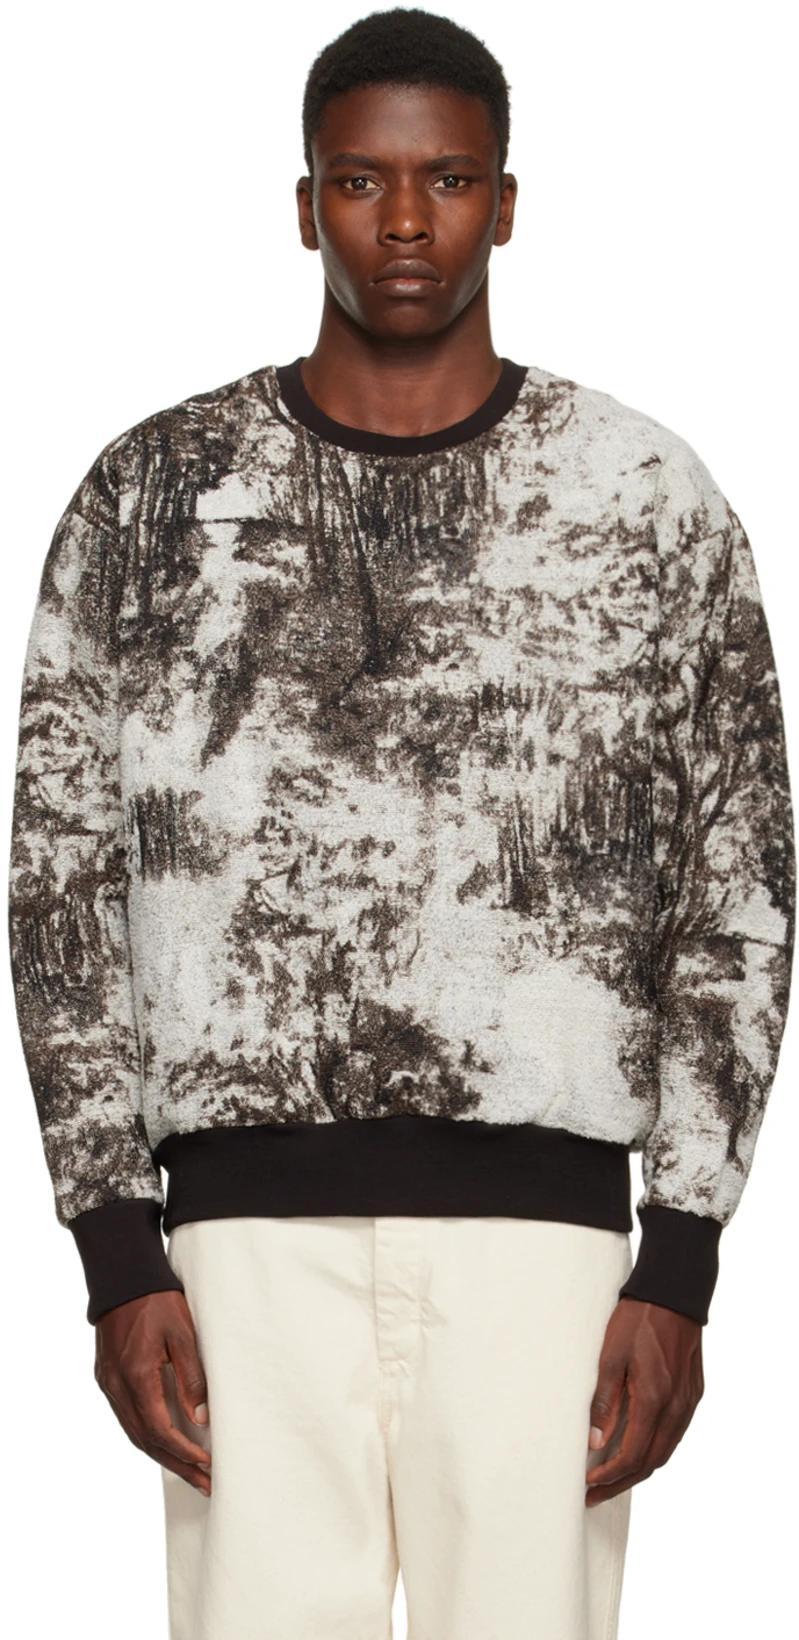 Off-White Patterned Sweatshirt by 4SDESIGNS